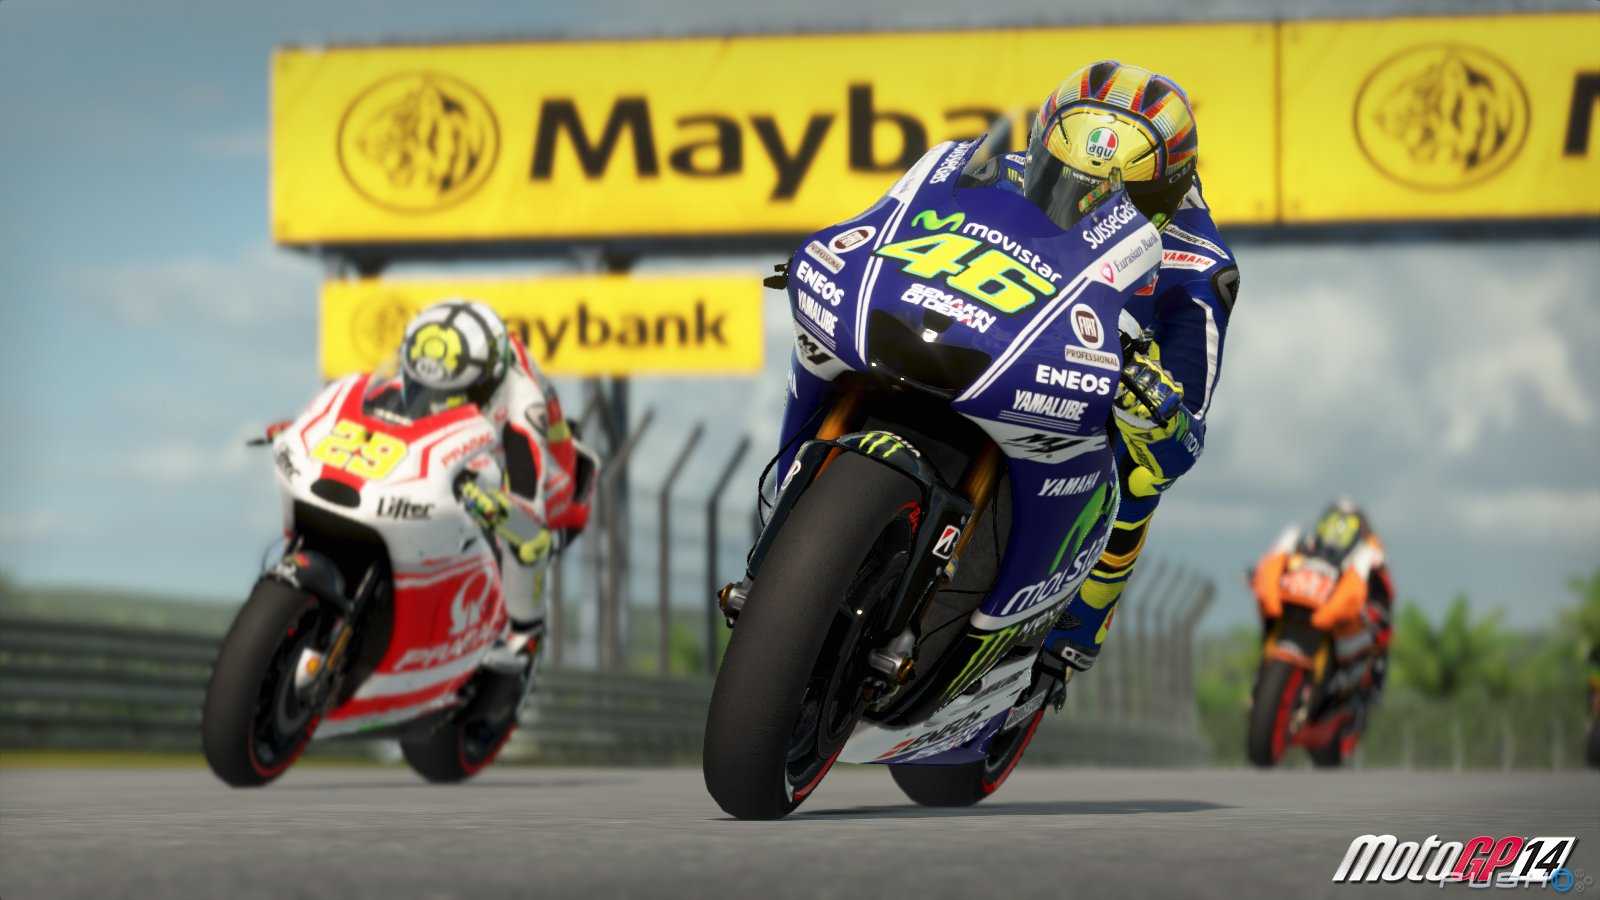 motogp 3 game for pc